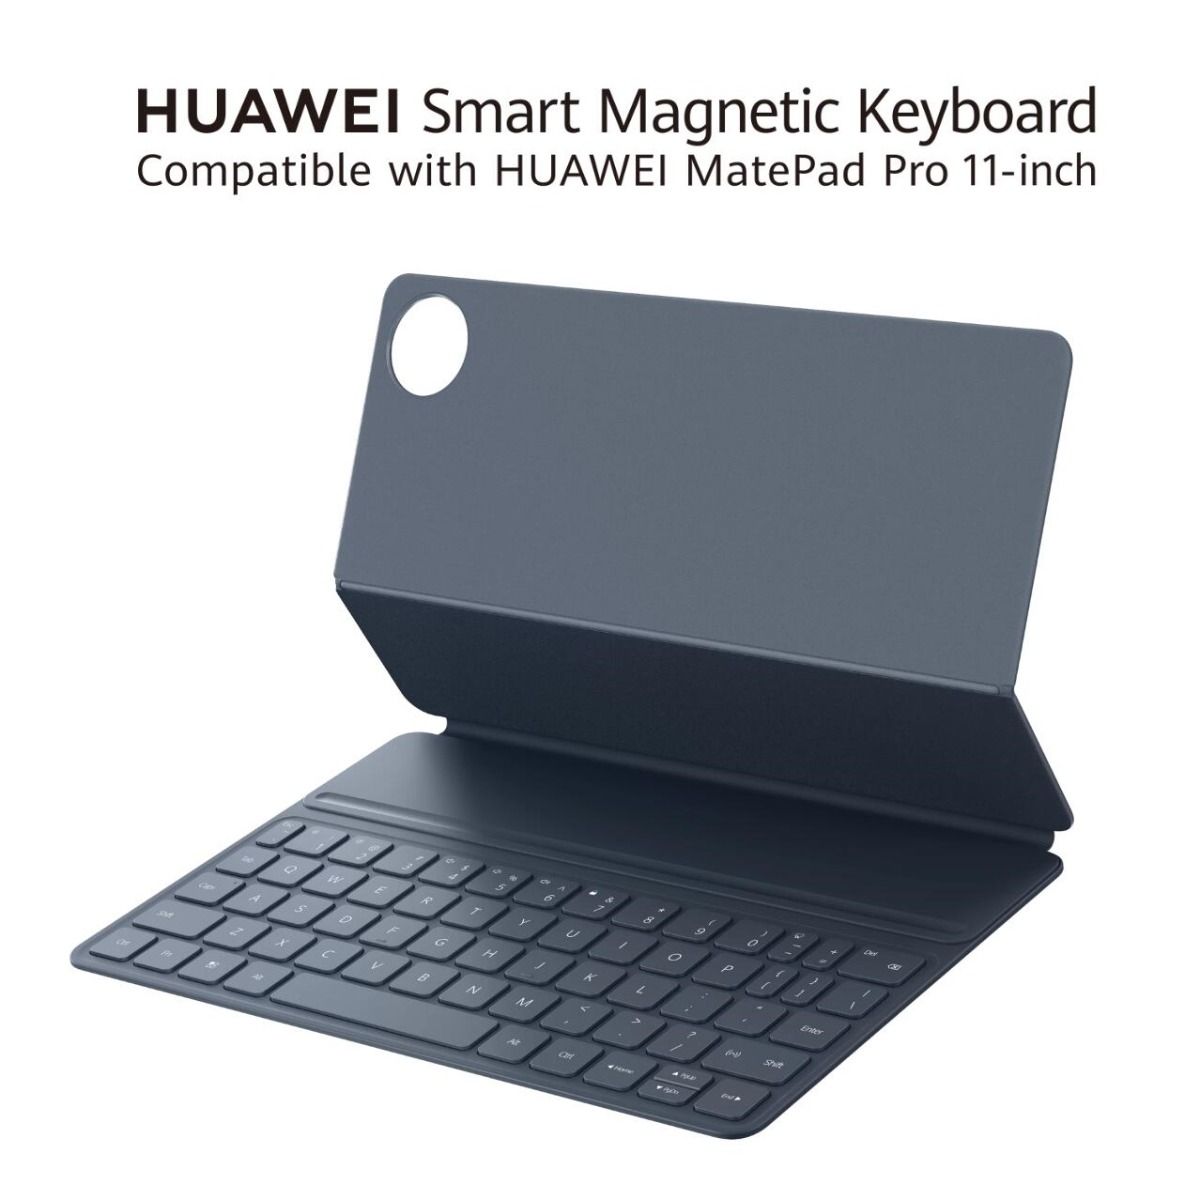 HUAWEI Smart Magnetic Keyboard (Compatible with HUAWEI MatePad Pro 11-inch)